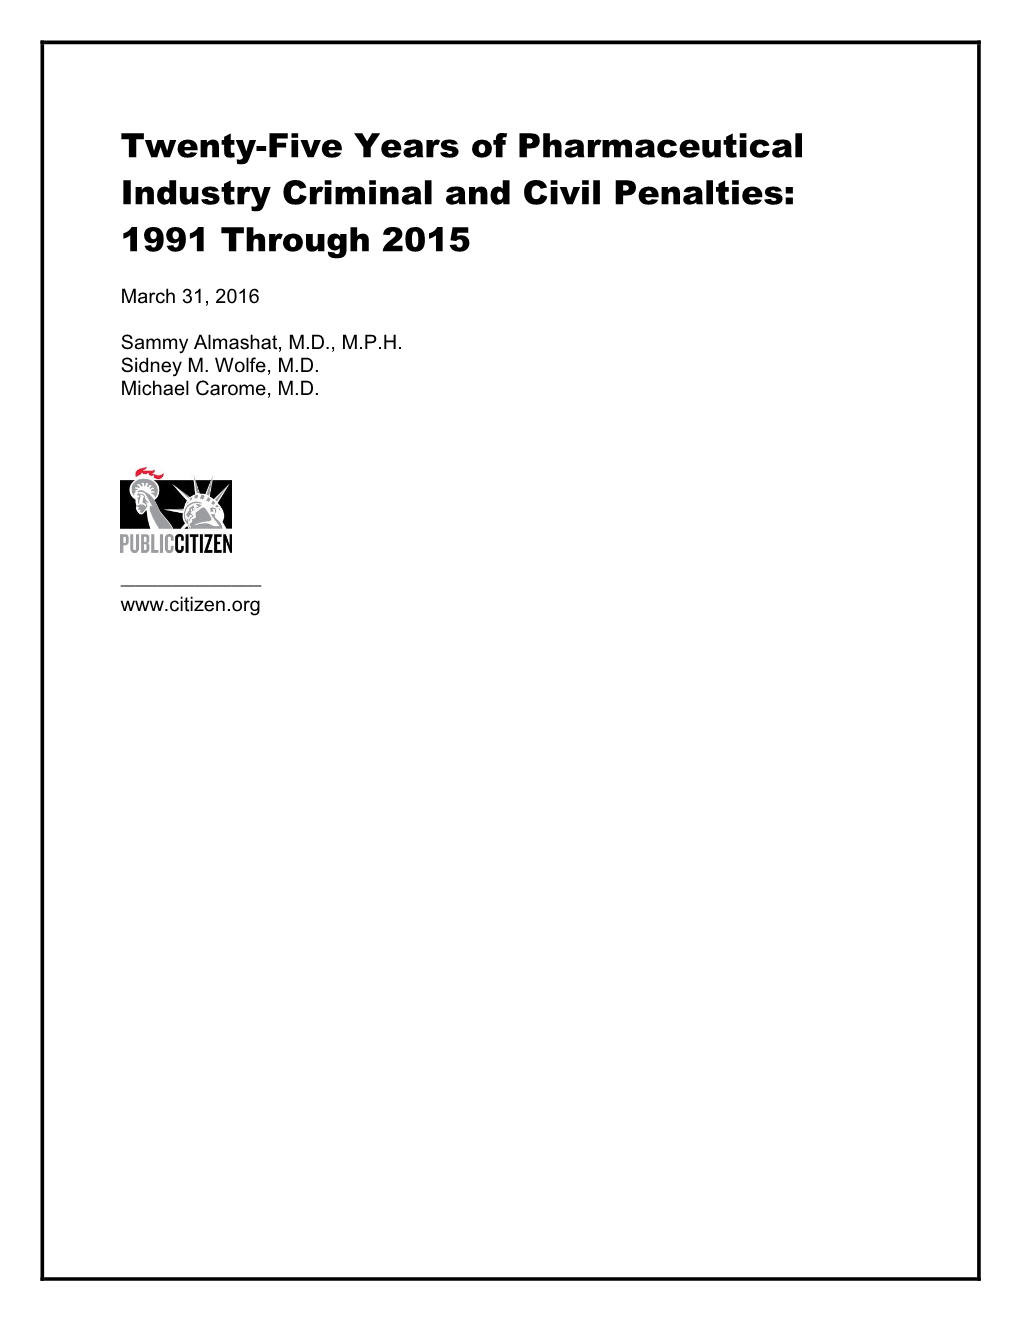 Pharmaceutical Industry Criminal and Civil Penalties: 1991 Through 2015